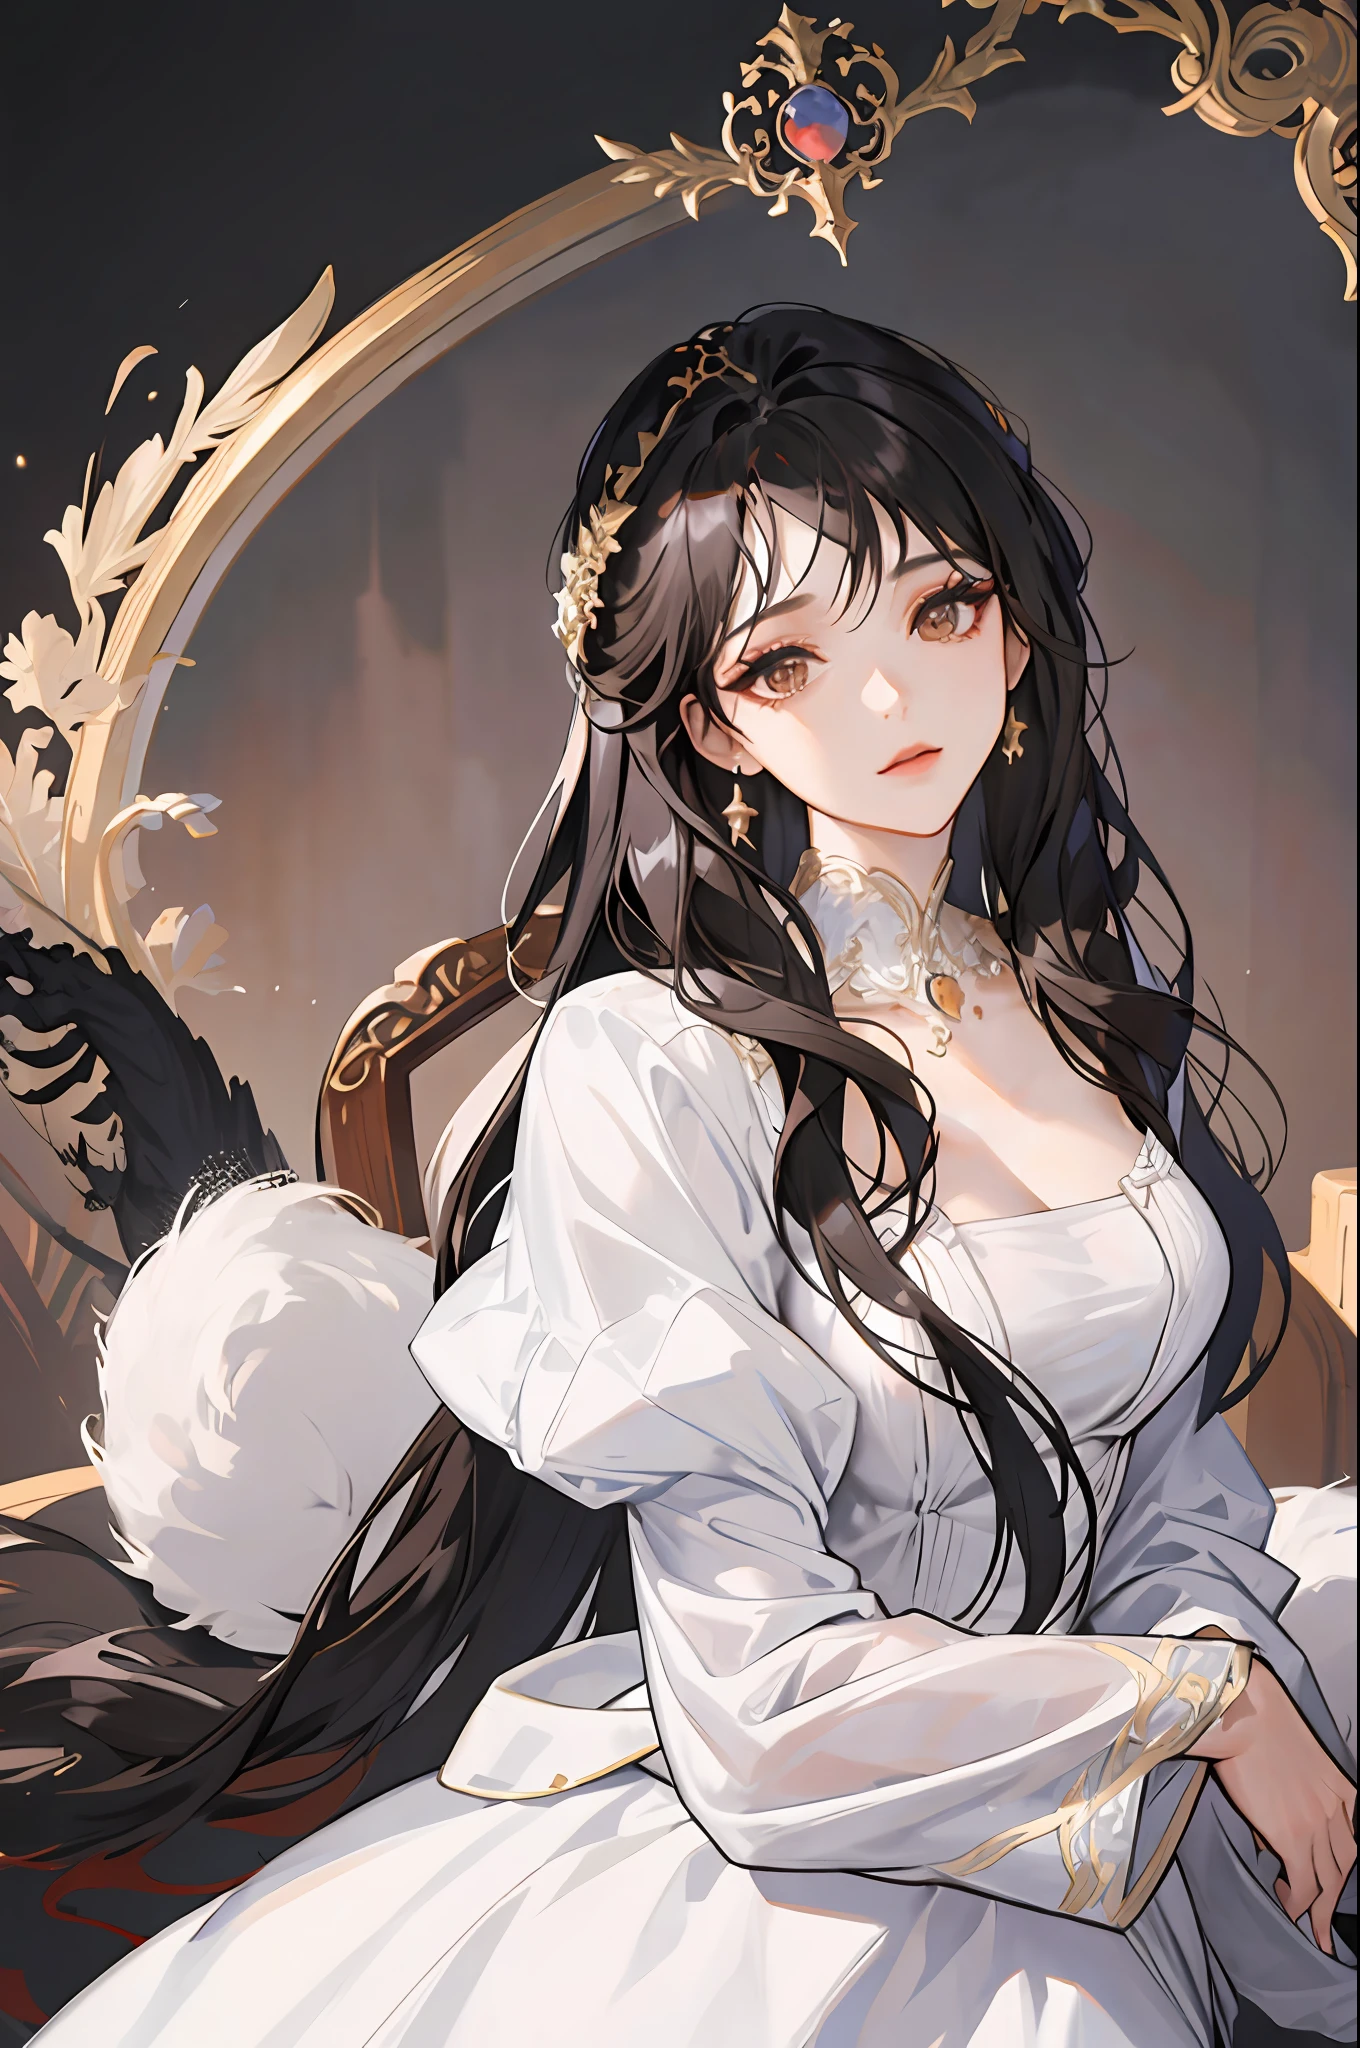 ((masterpiece: 1.2, best quality)), 1 woman, long black hair, brown eyes (gorgeous: 1.4), white dress, fantasy, elegant, royalty, fantastic light and shadow, extremely detailed face, strong woman, suit